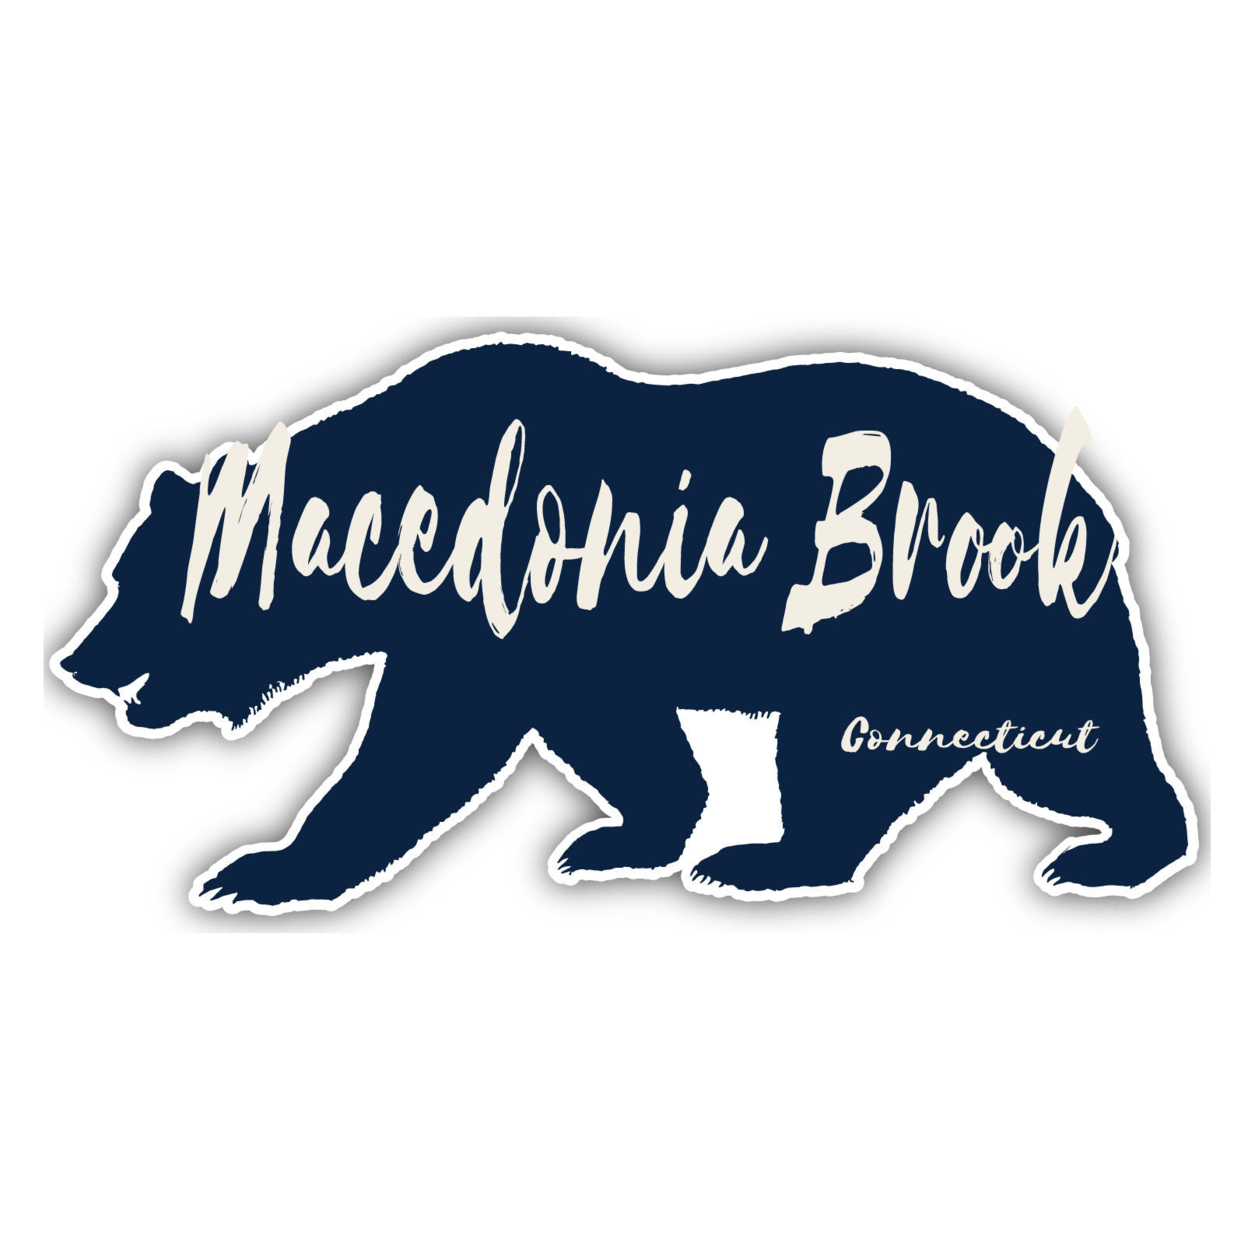 Macedonia Brook Connecticut Souvenir Decorative Stickers (Choose Theme And Size) - 2-Inch, Bear